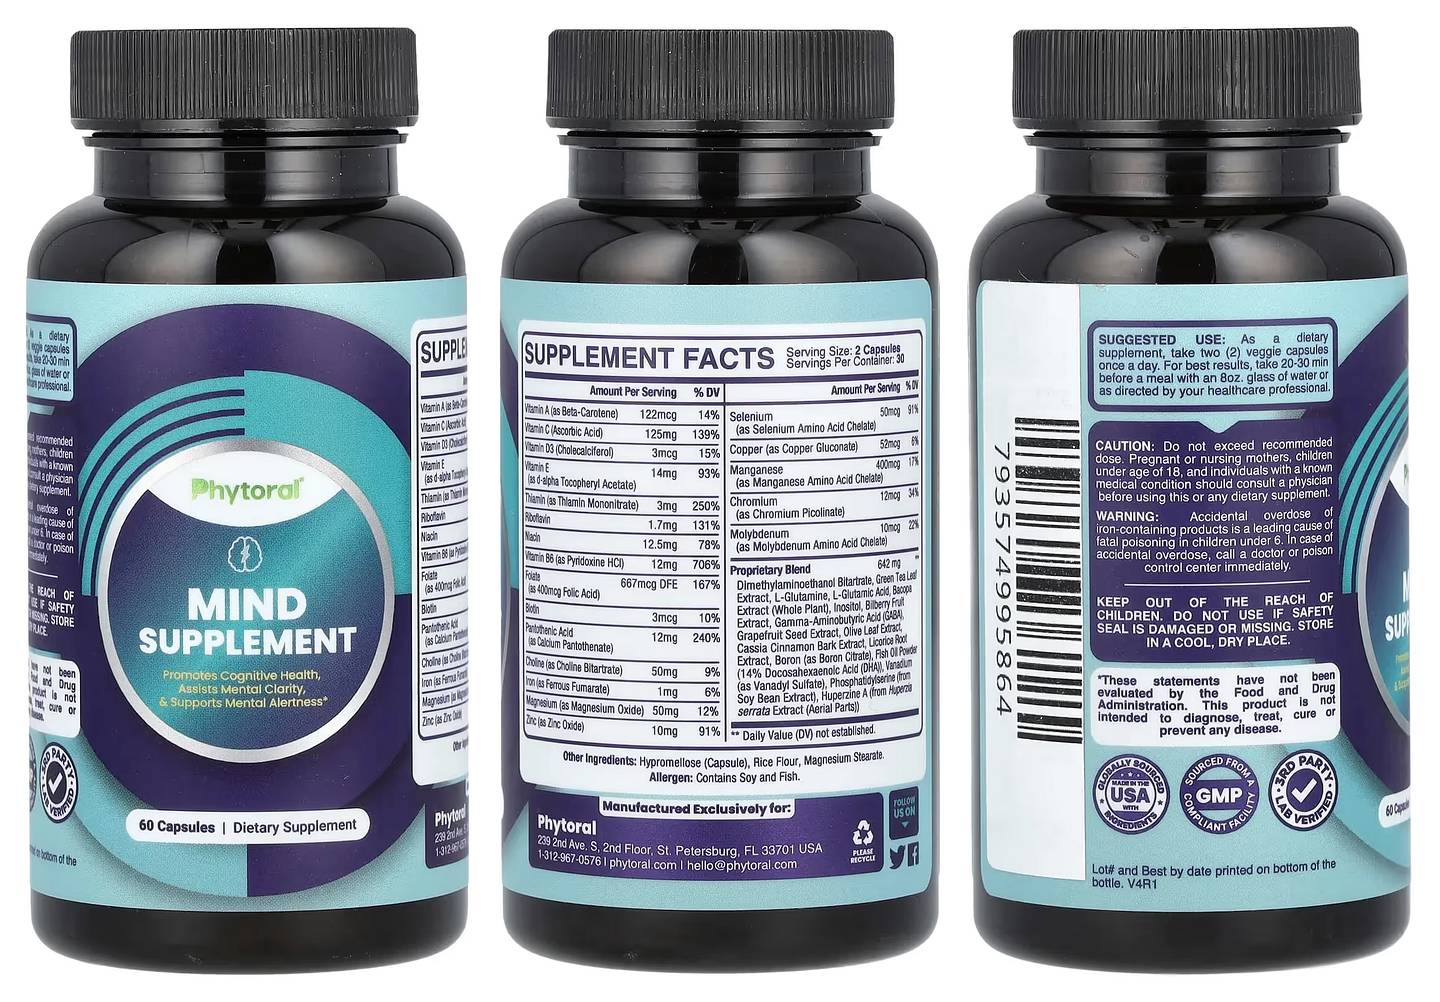 Phytoral, Mind Supplement packaging